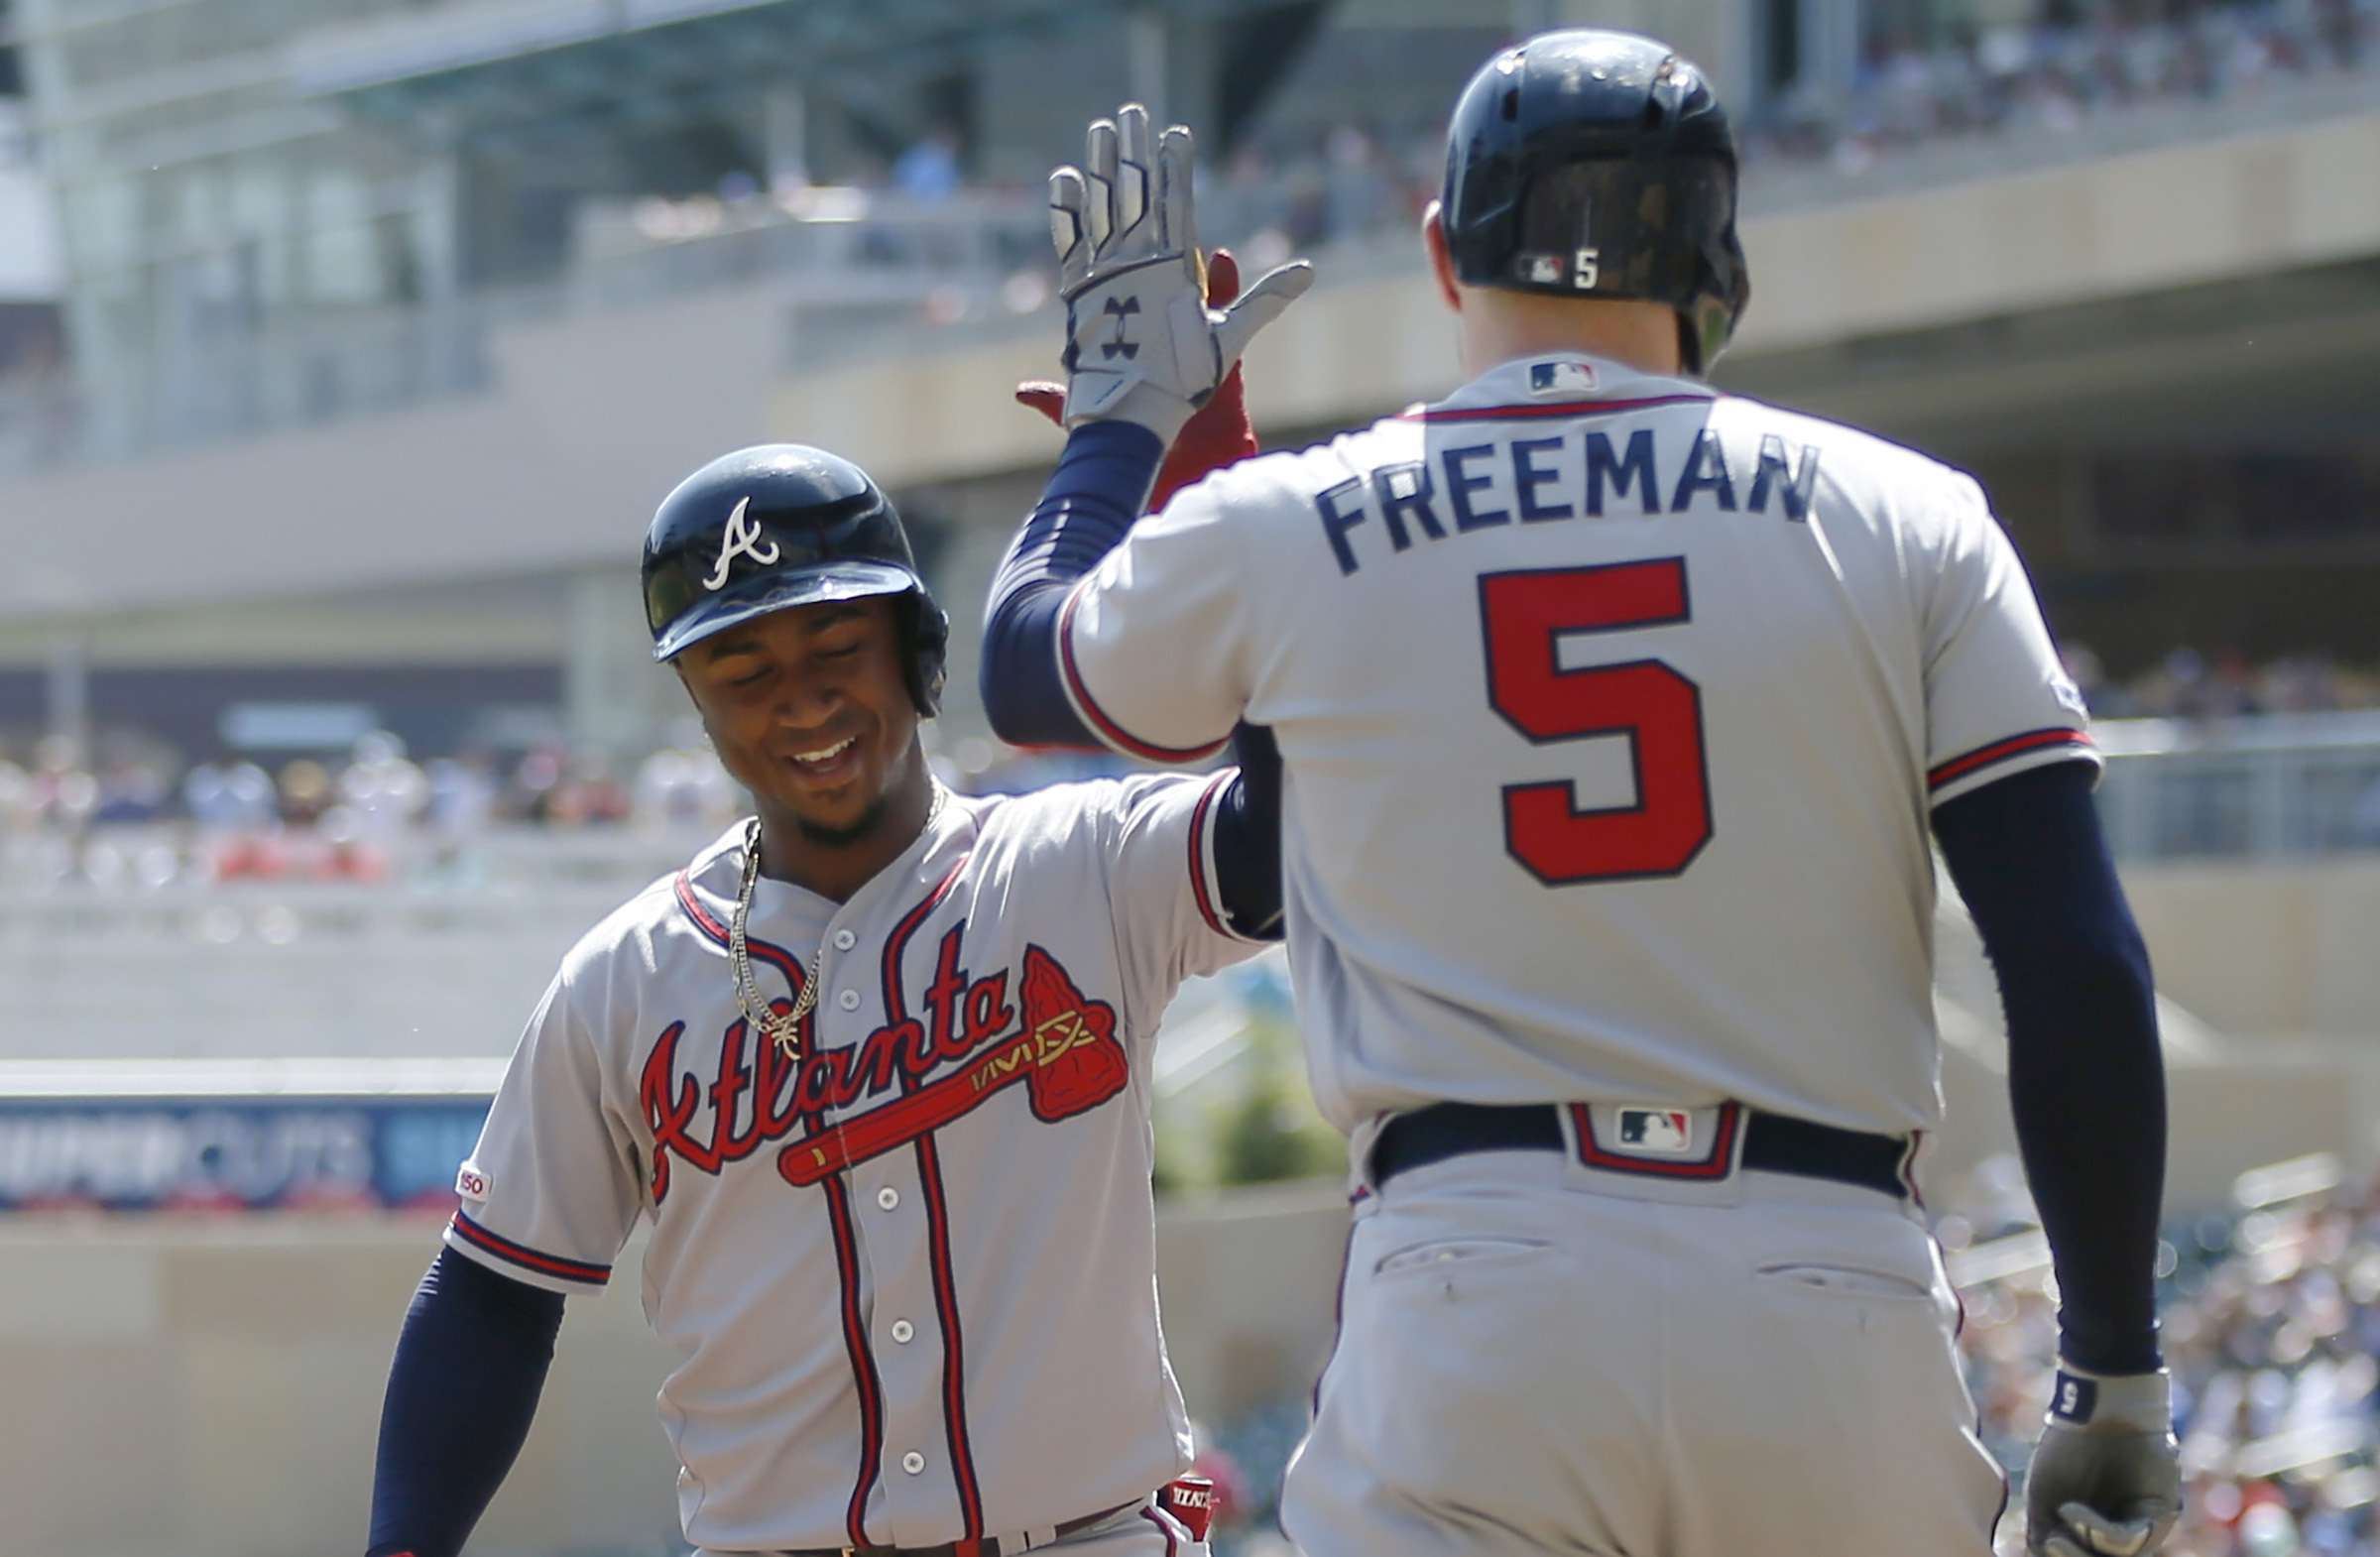 Braves hit 4 homers in 11-7 win to take series from Twins